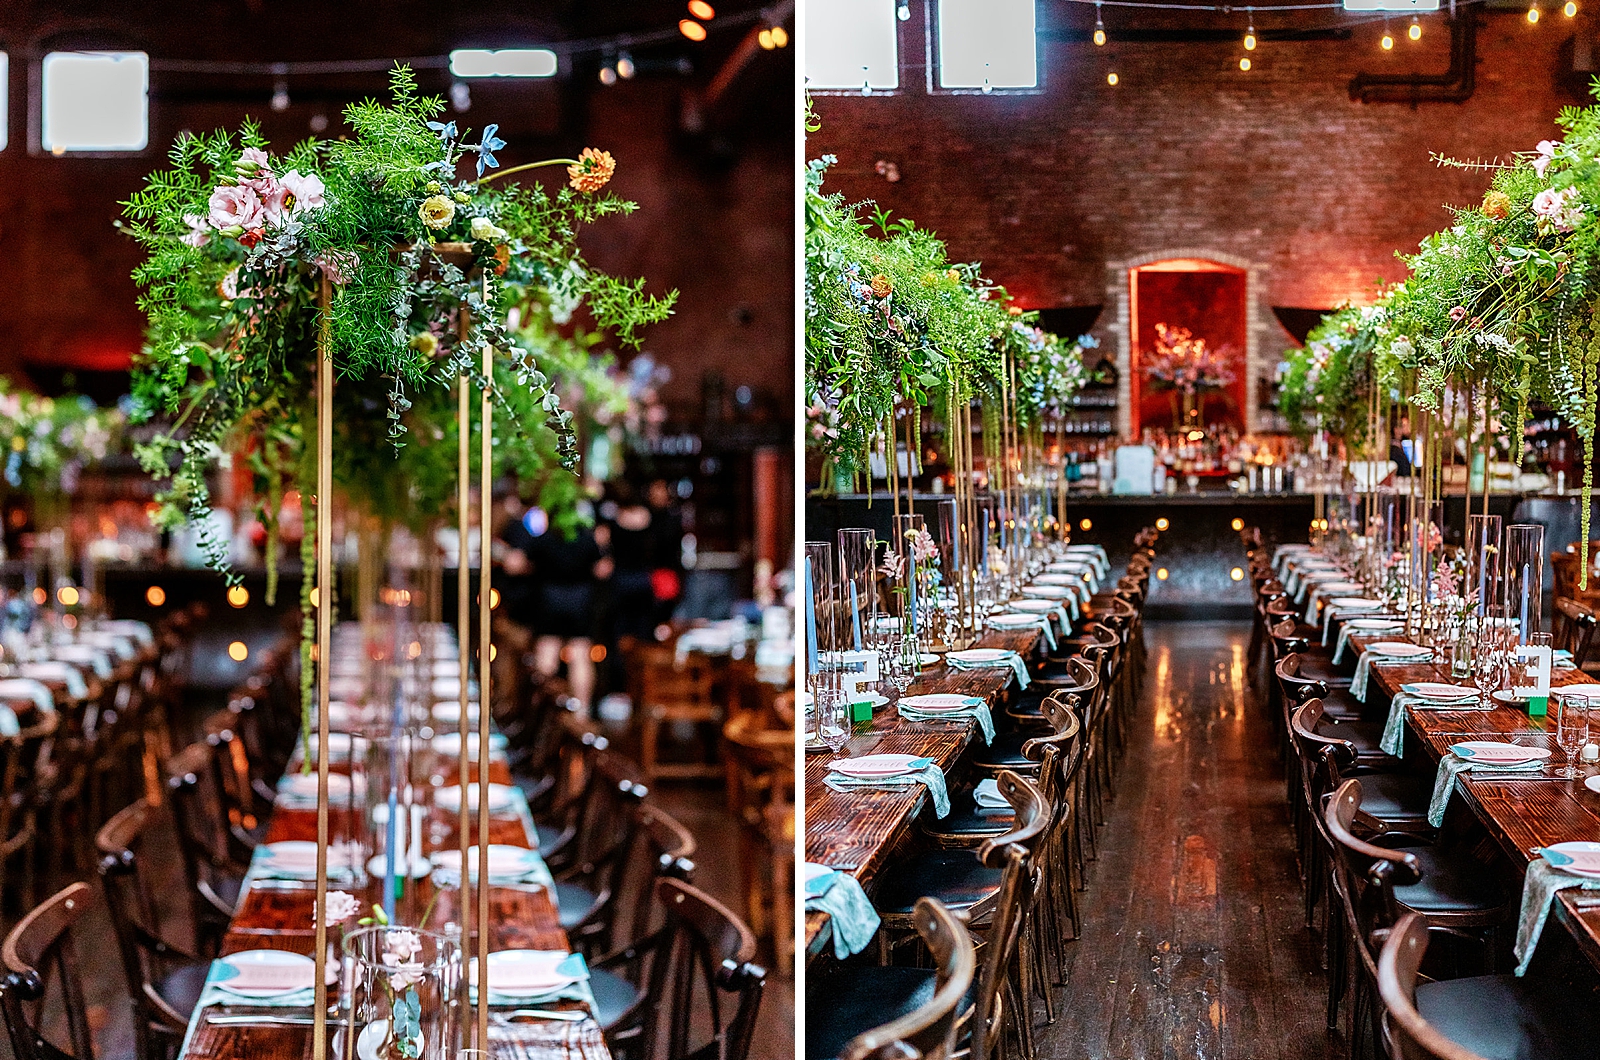 Left photo: Close up shot of the florals and greenery on the reception tables. 
Right photo: Close up shot of the florals and greenery on the reception tables. 